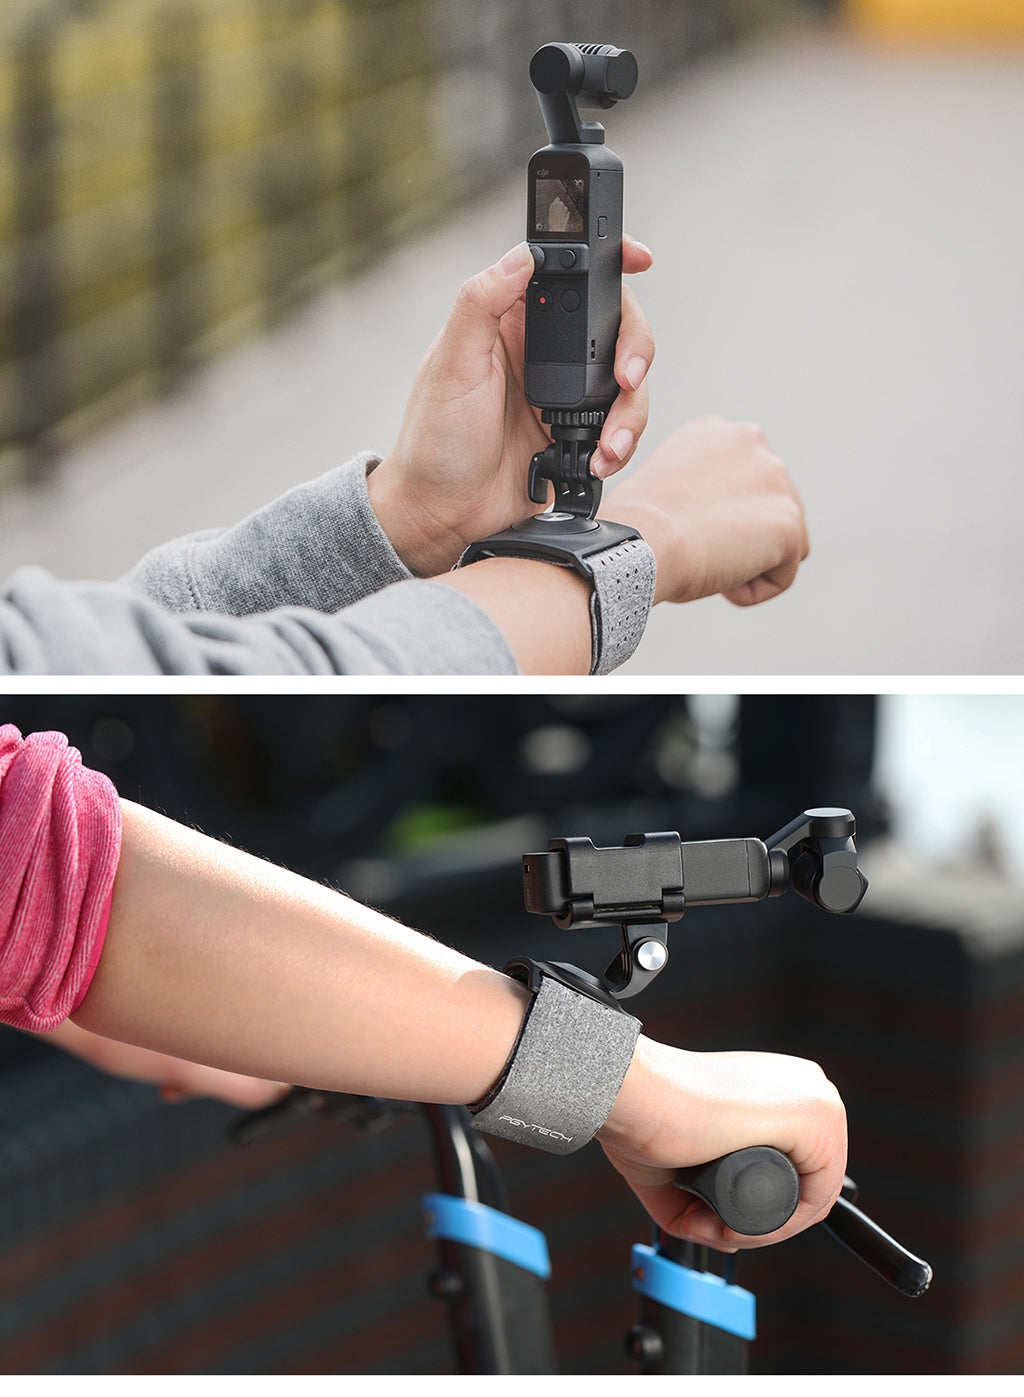 PGYTECH Osmo Pocket Action Camera Hand and Wrist Strap